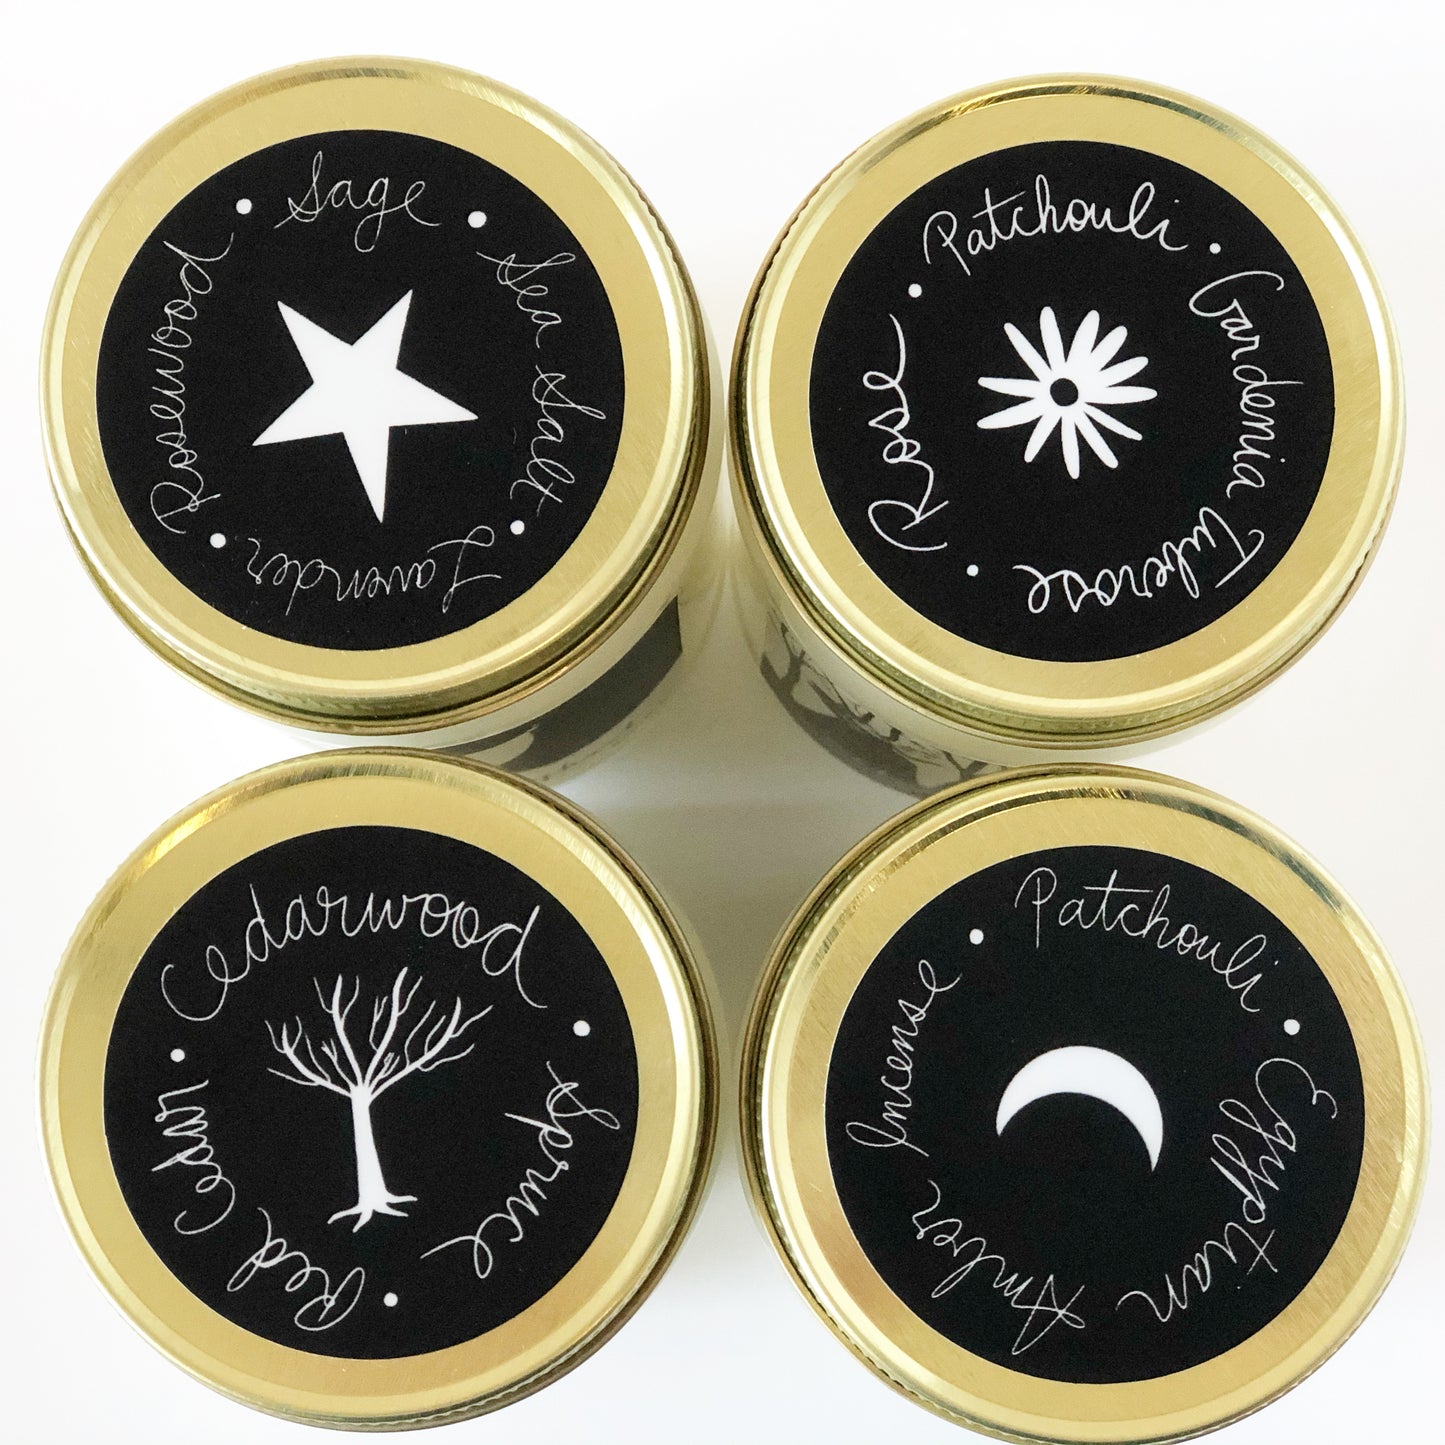  natural tarot candles from Soy Much Brighter in Beverly